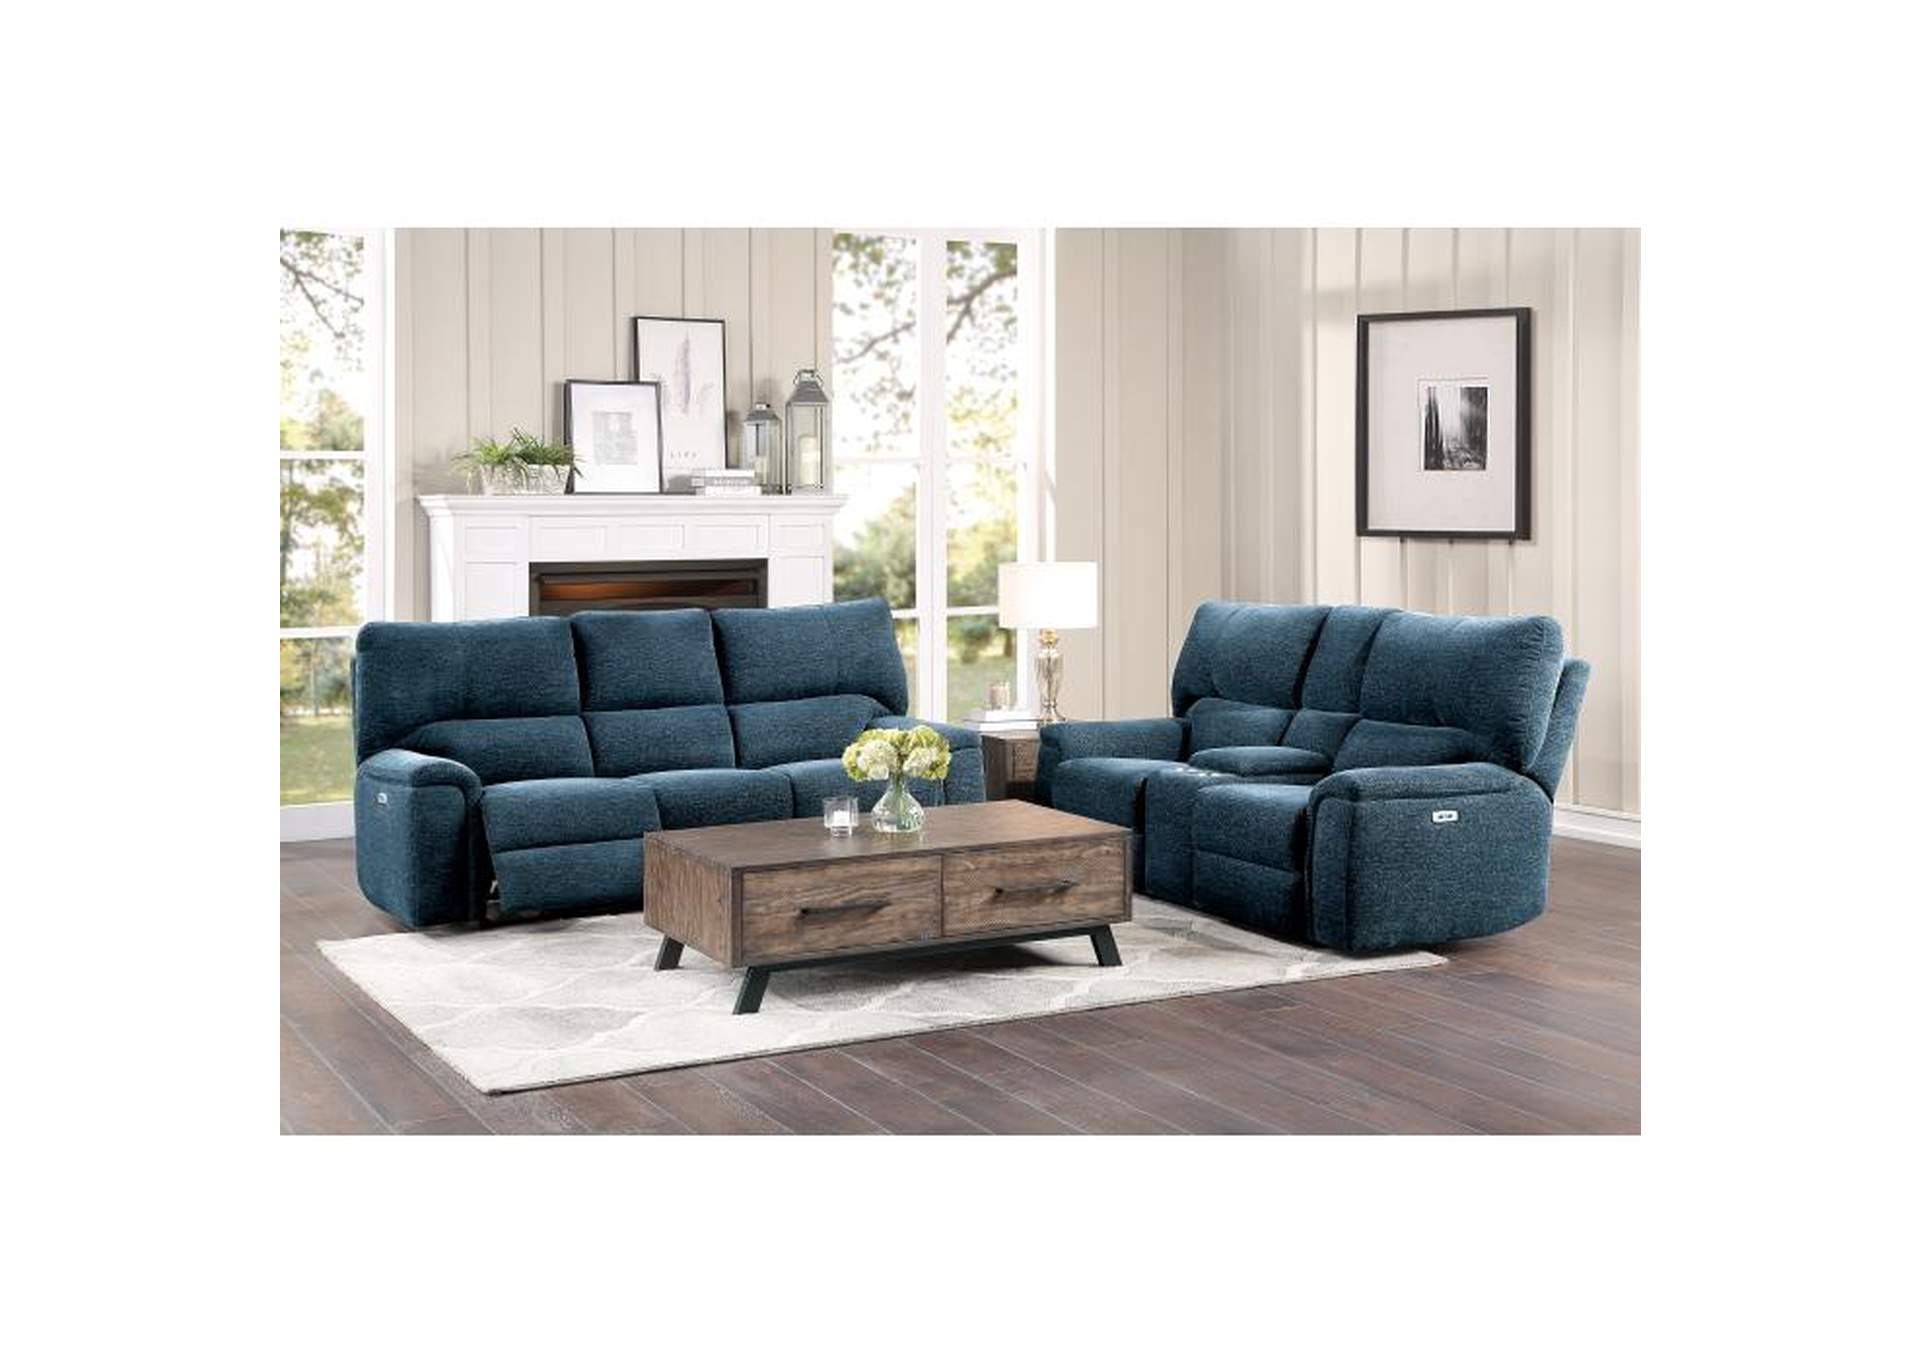 Dickinson Power Double Reclining Sofa With Power Headrests,Homelegance